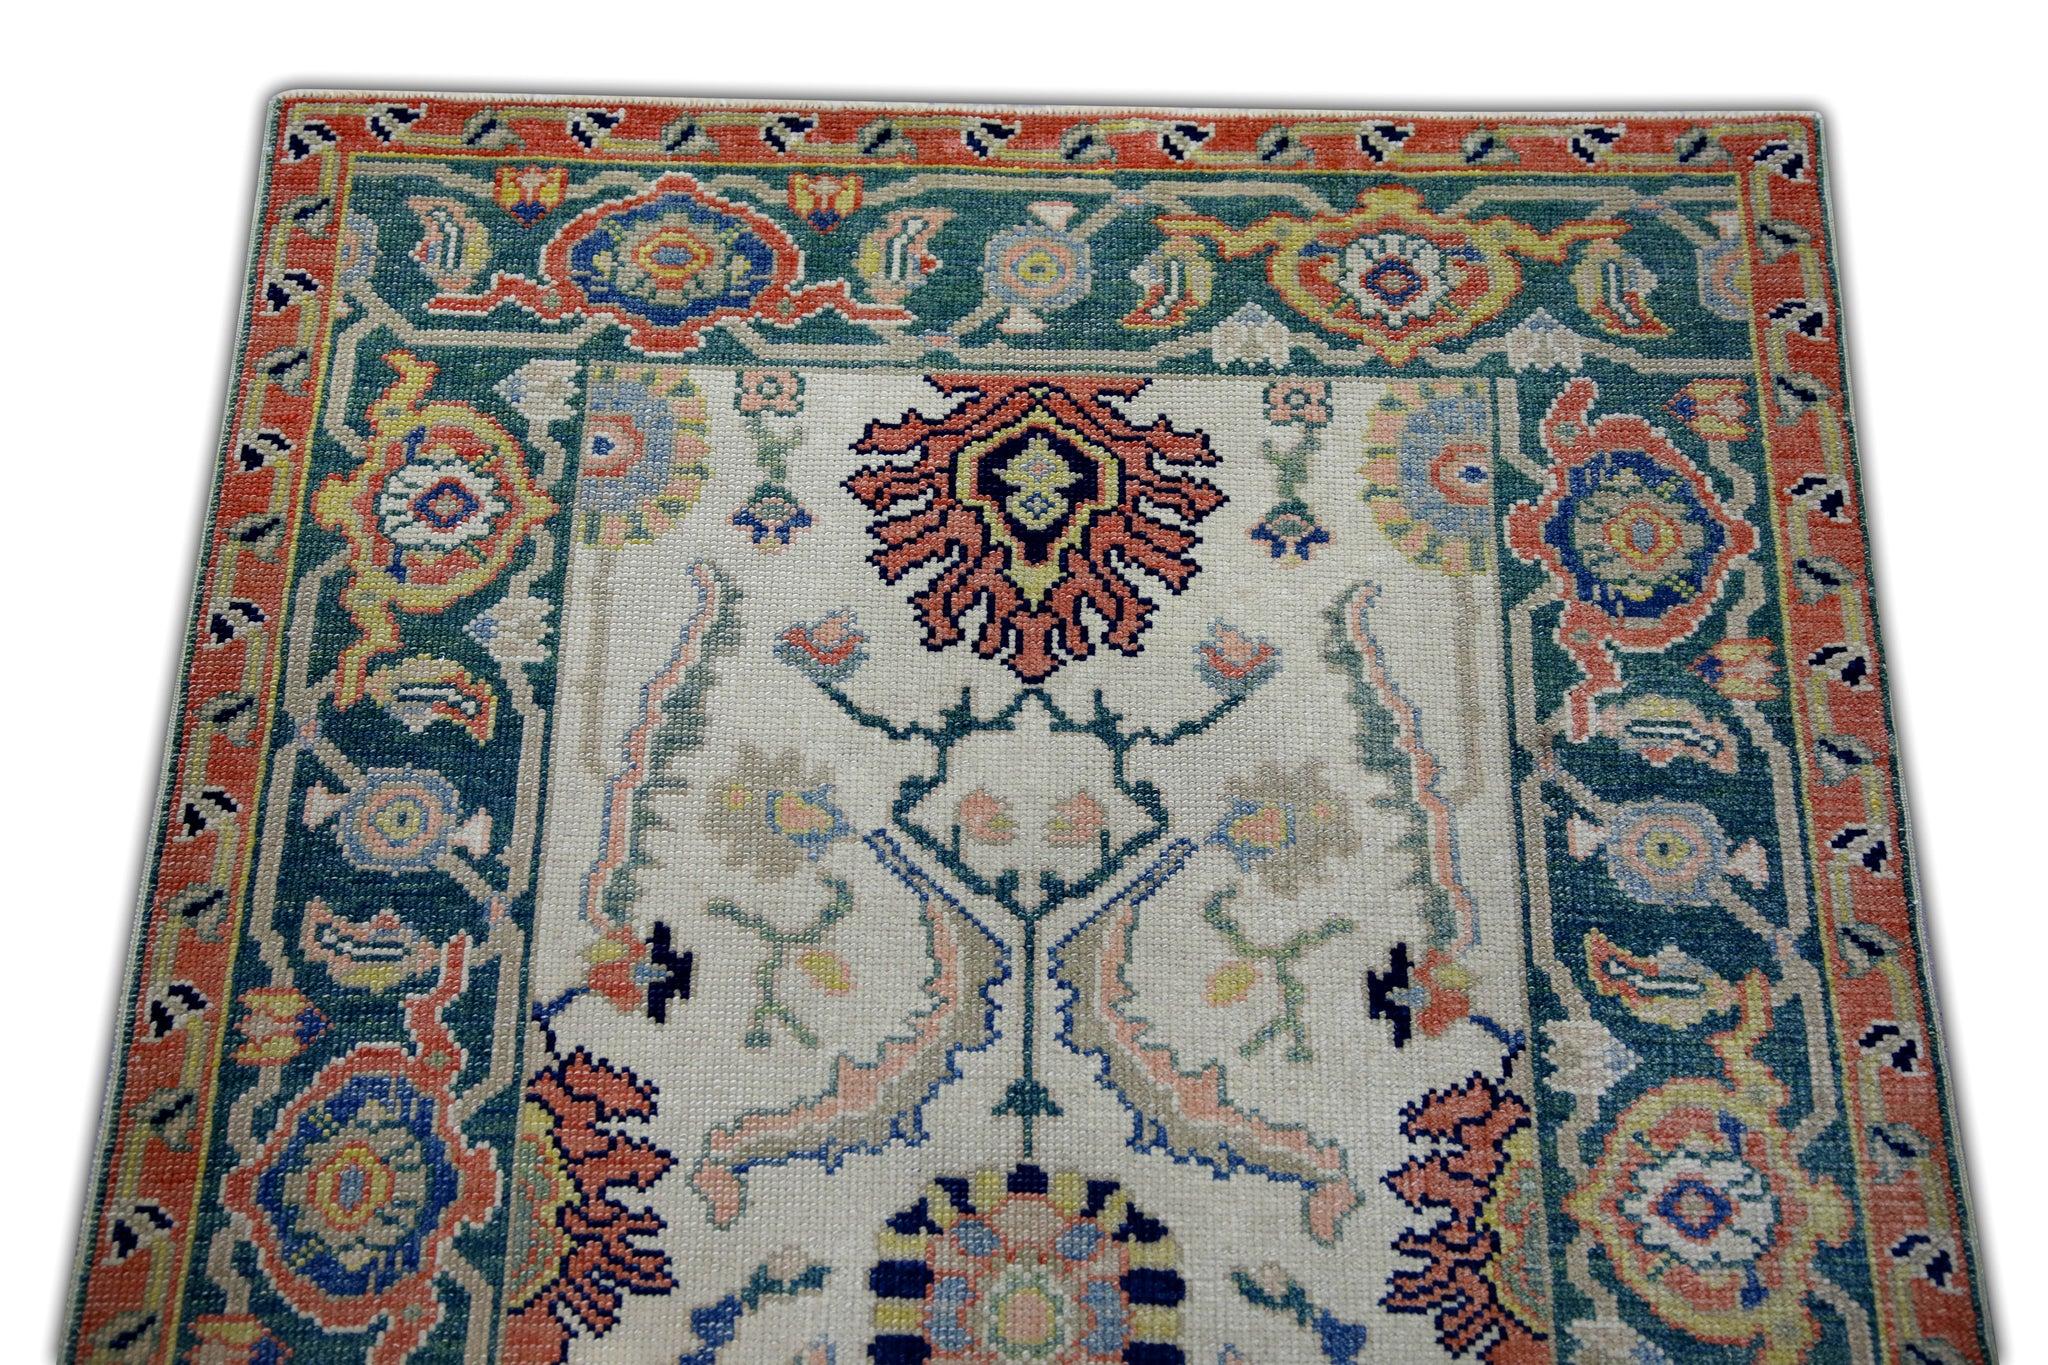 Floral Wool Turkish Finewoven Oushak Rug in Red, Cream, and Green 2'7